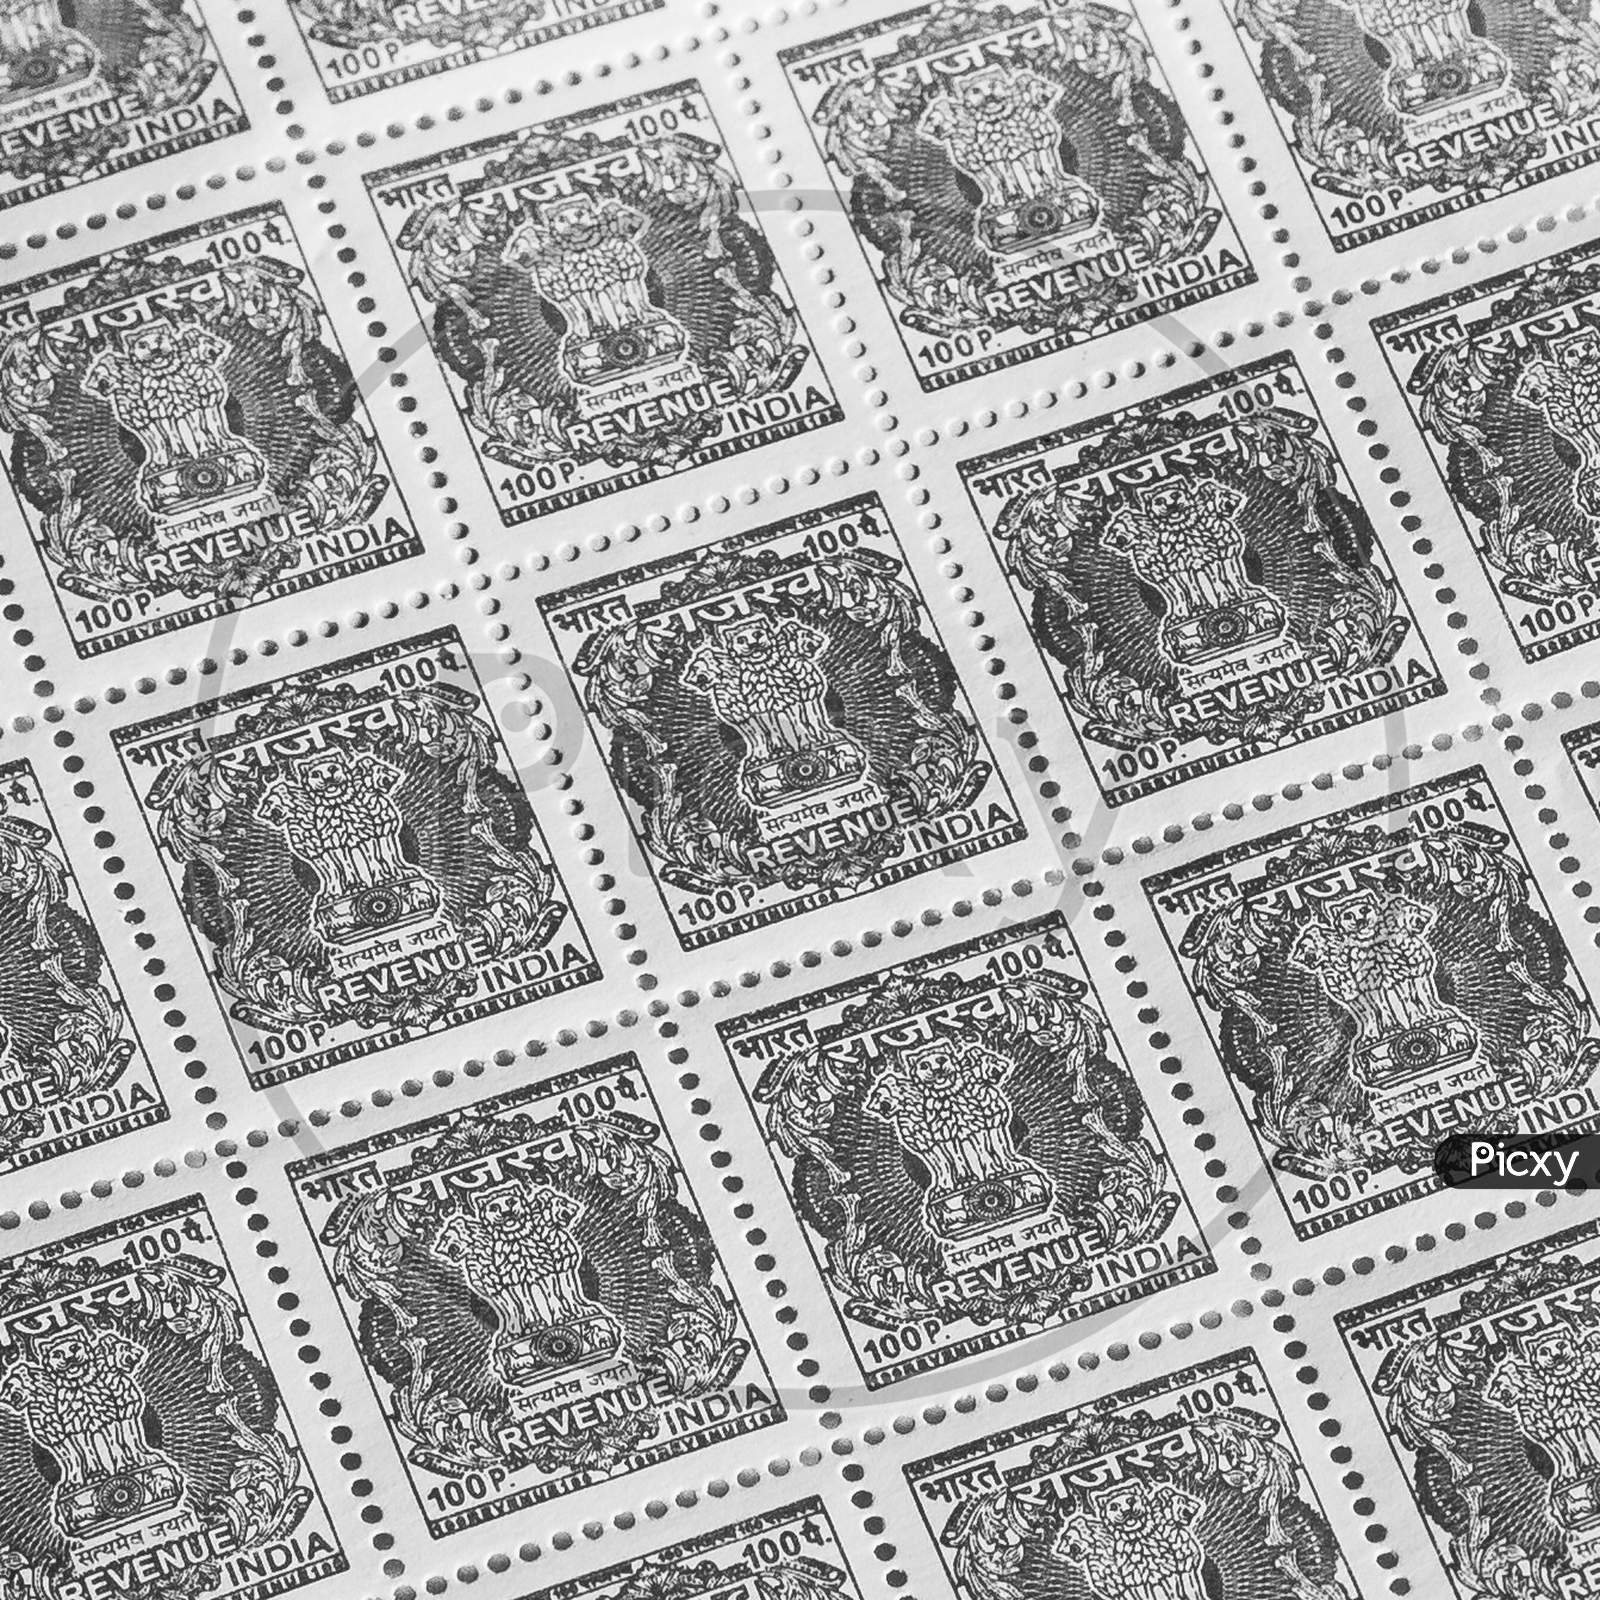 Revenue Stamps in Black and White